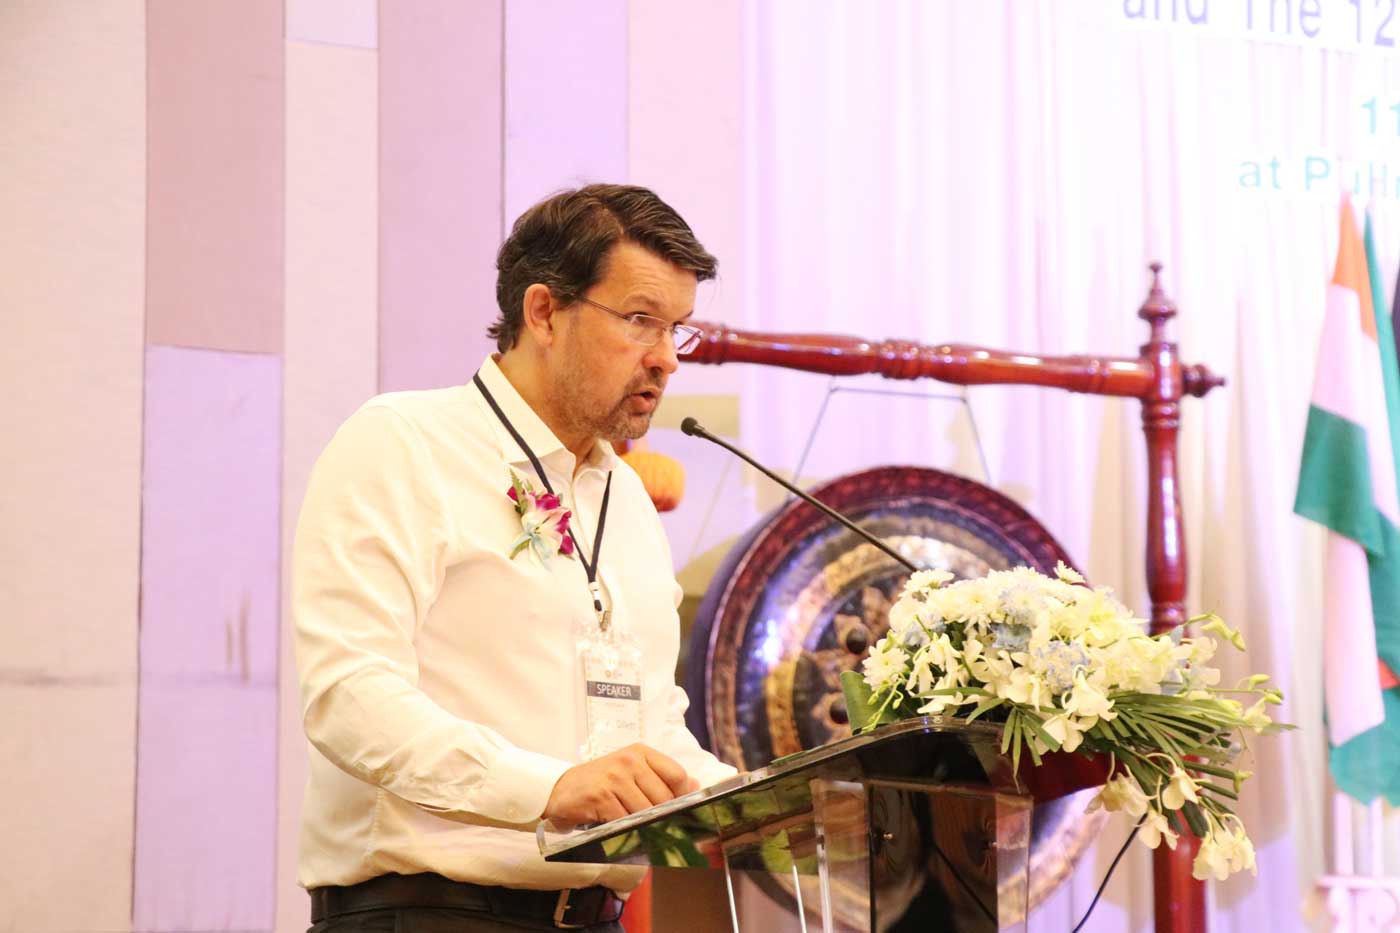 Welcome speech by Dr. Nond Rojvachiranonda, the President of Thai Cleft Lip-Palate and Craniofacial Association (TCCA) and the Co-President of the 9th Asian Pacific Cleft Lip-Palate and Craniofacial Congress 2019